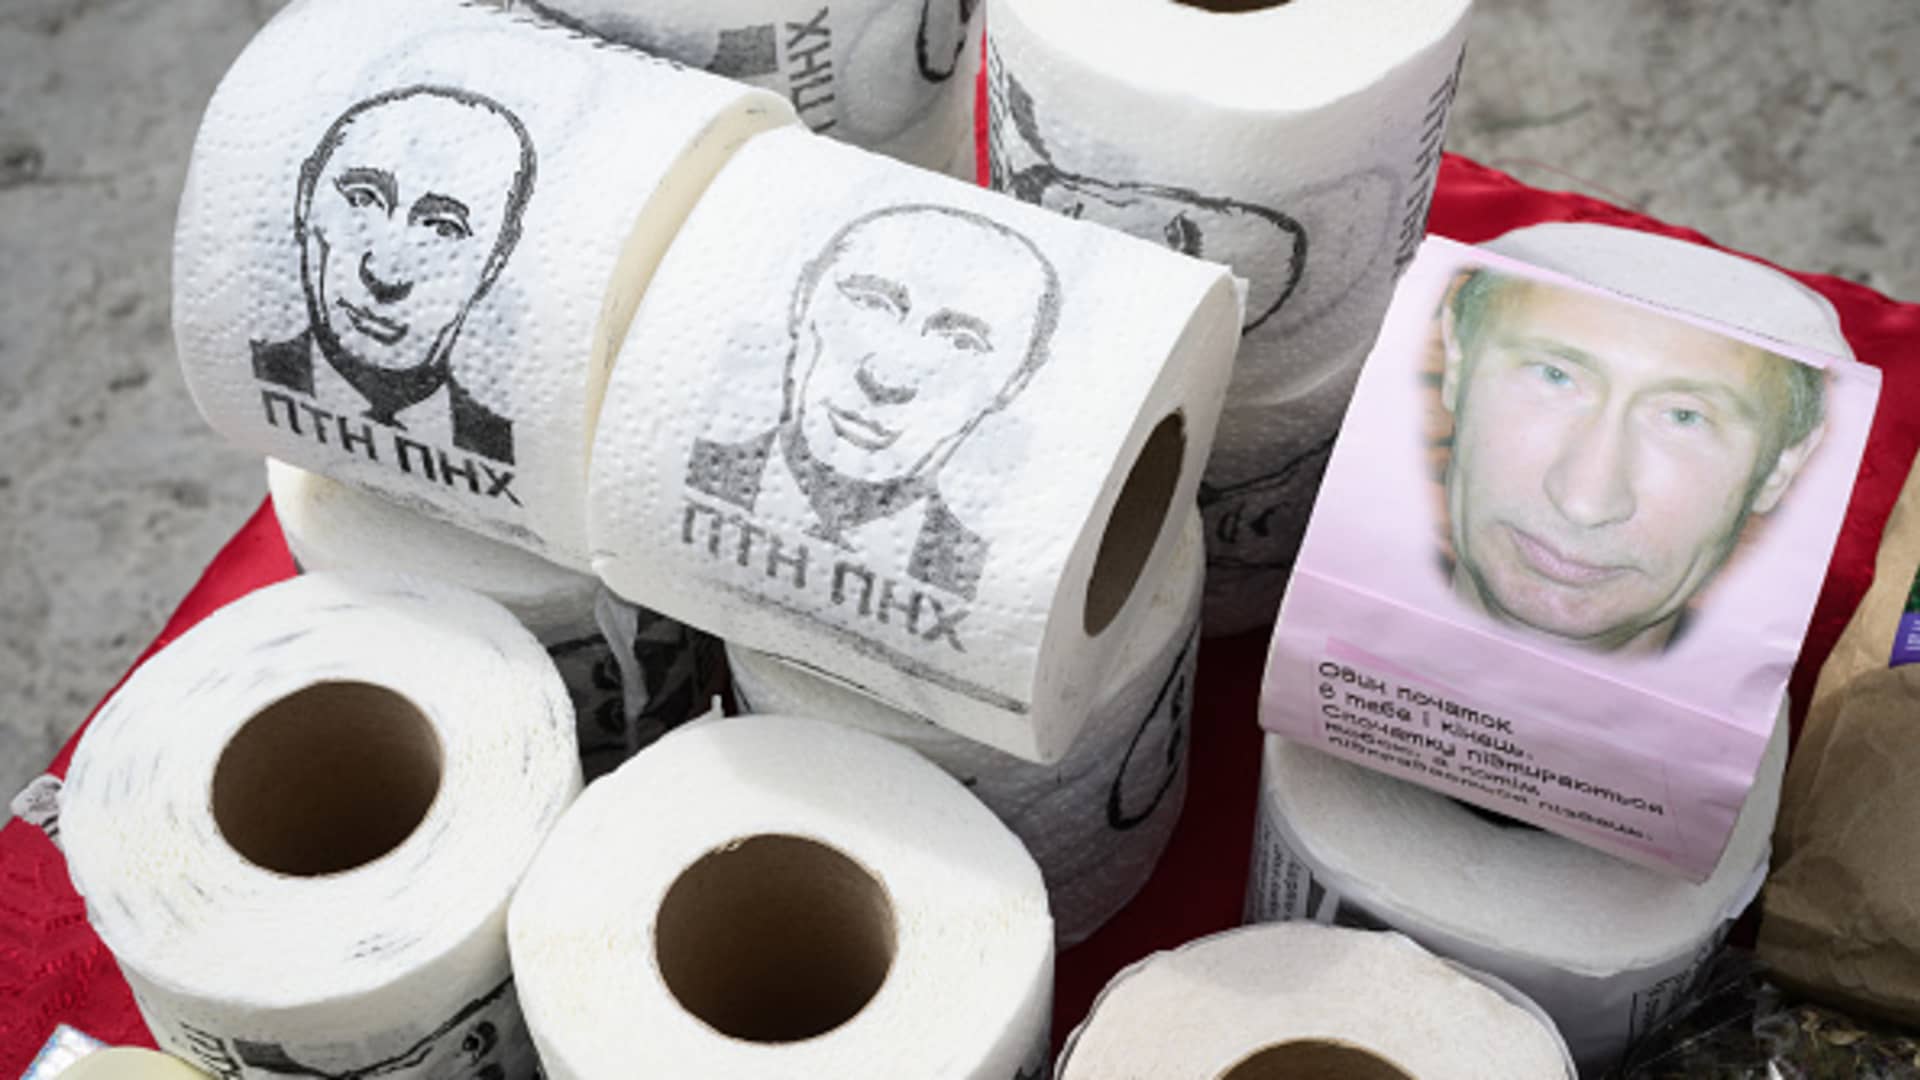 Satirical toilet paper featuring the face of Russian President Vladimir Putin is seen on April 28, 2022 in Lviv, Ukraine.